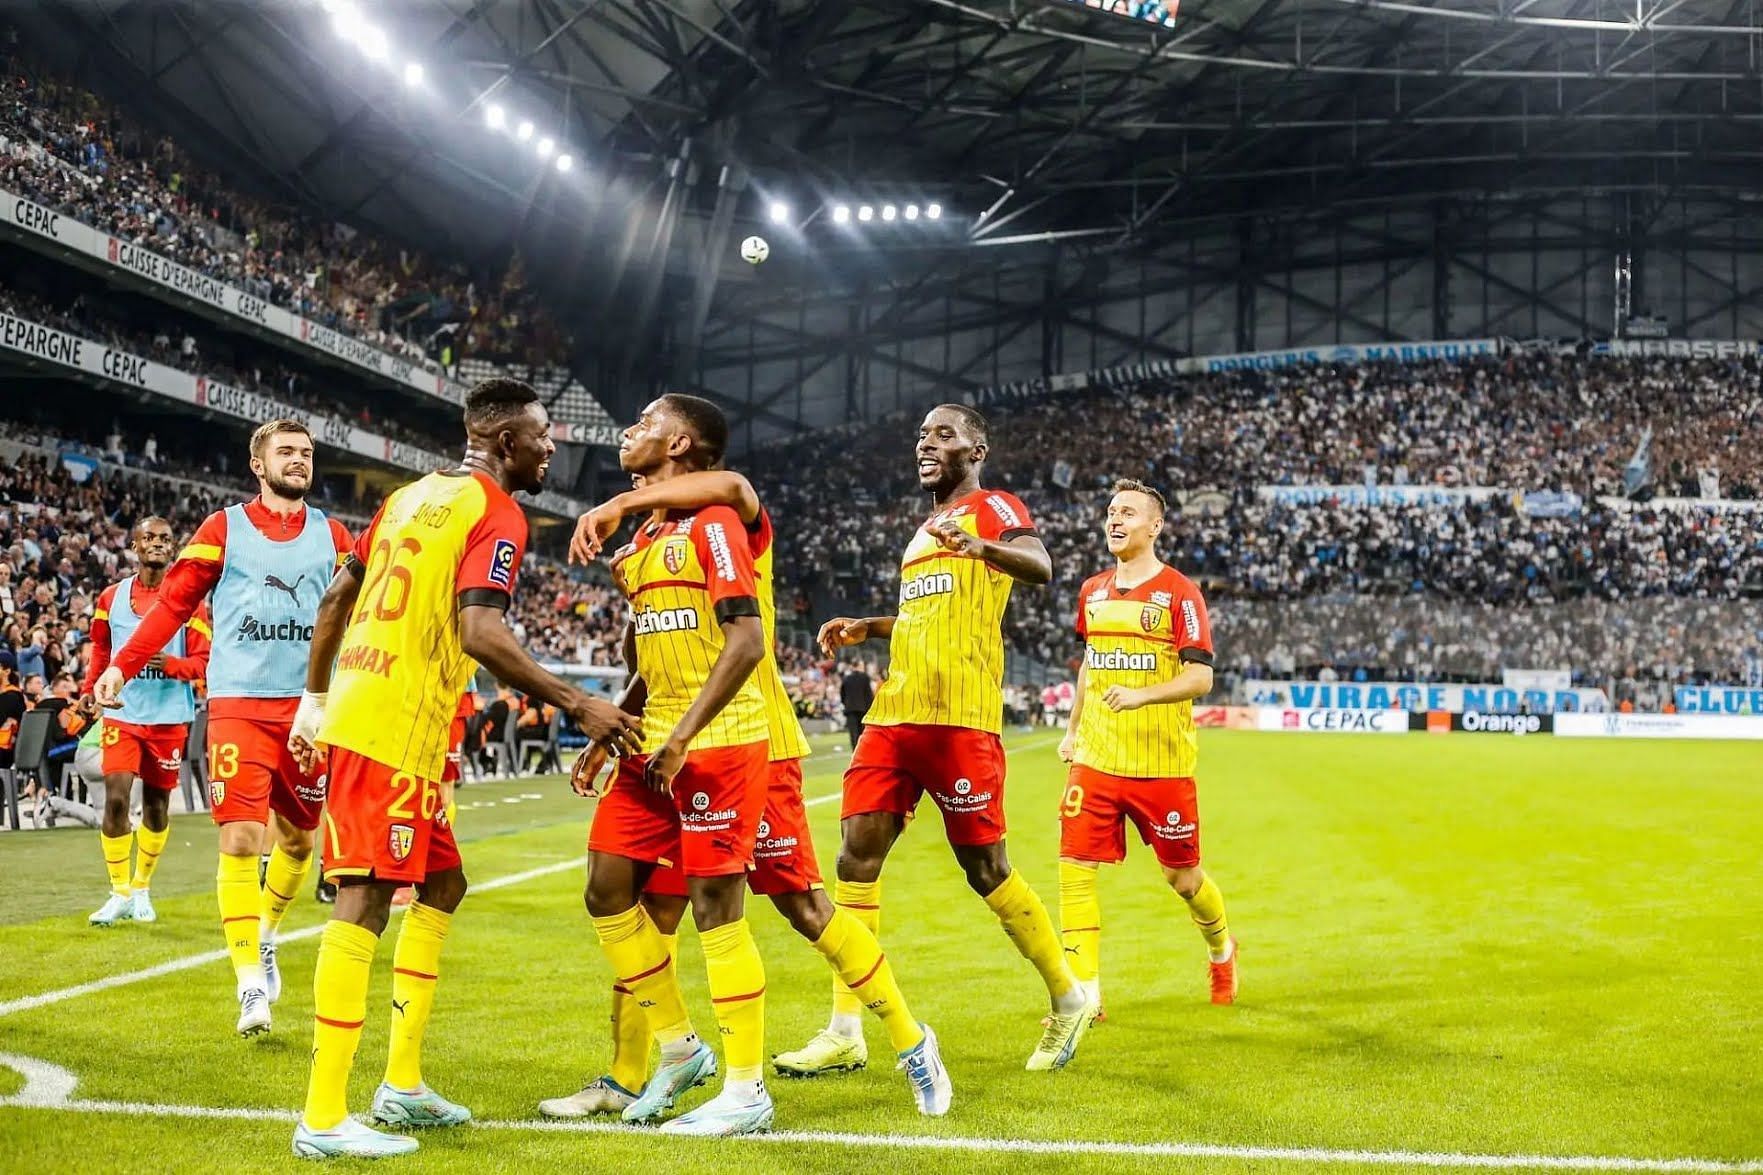 Lens will play in the Champions League next season